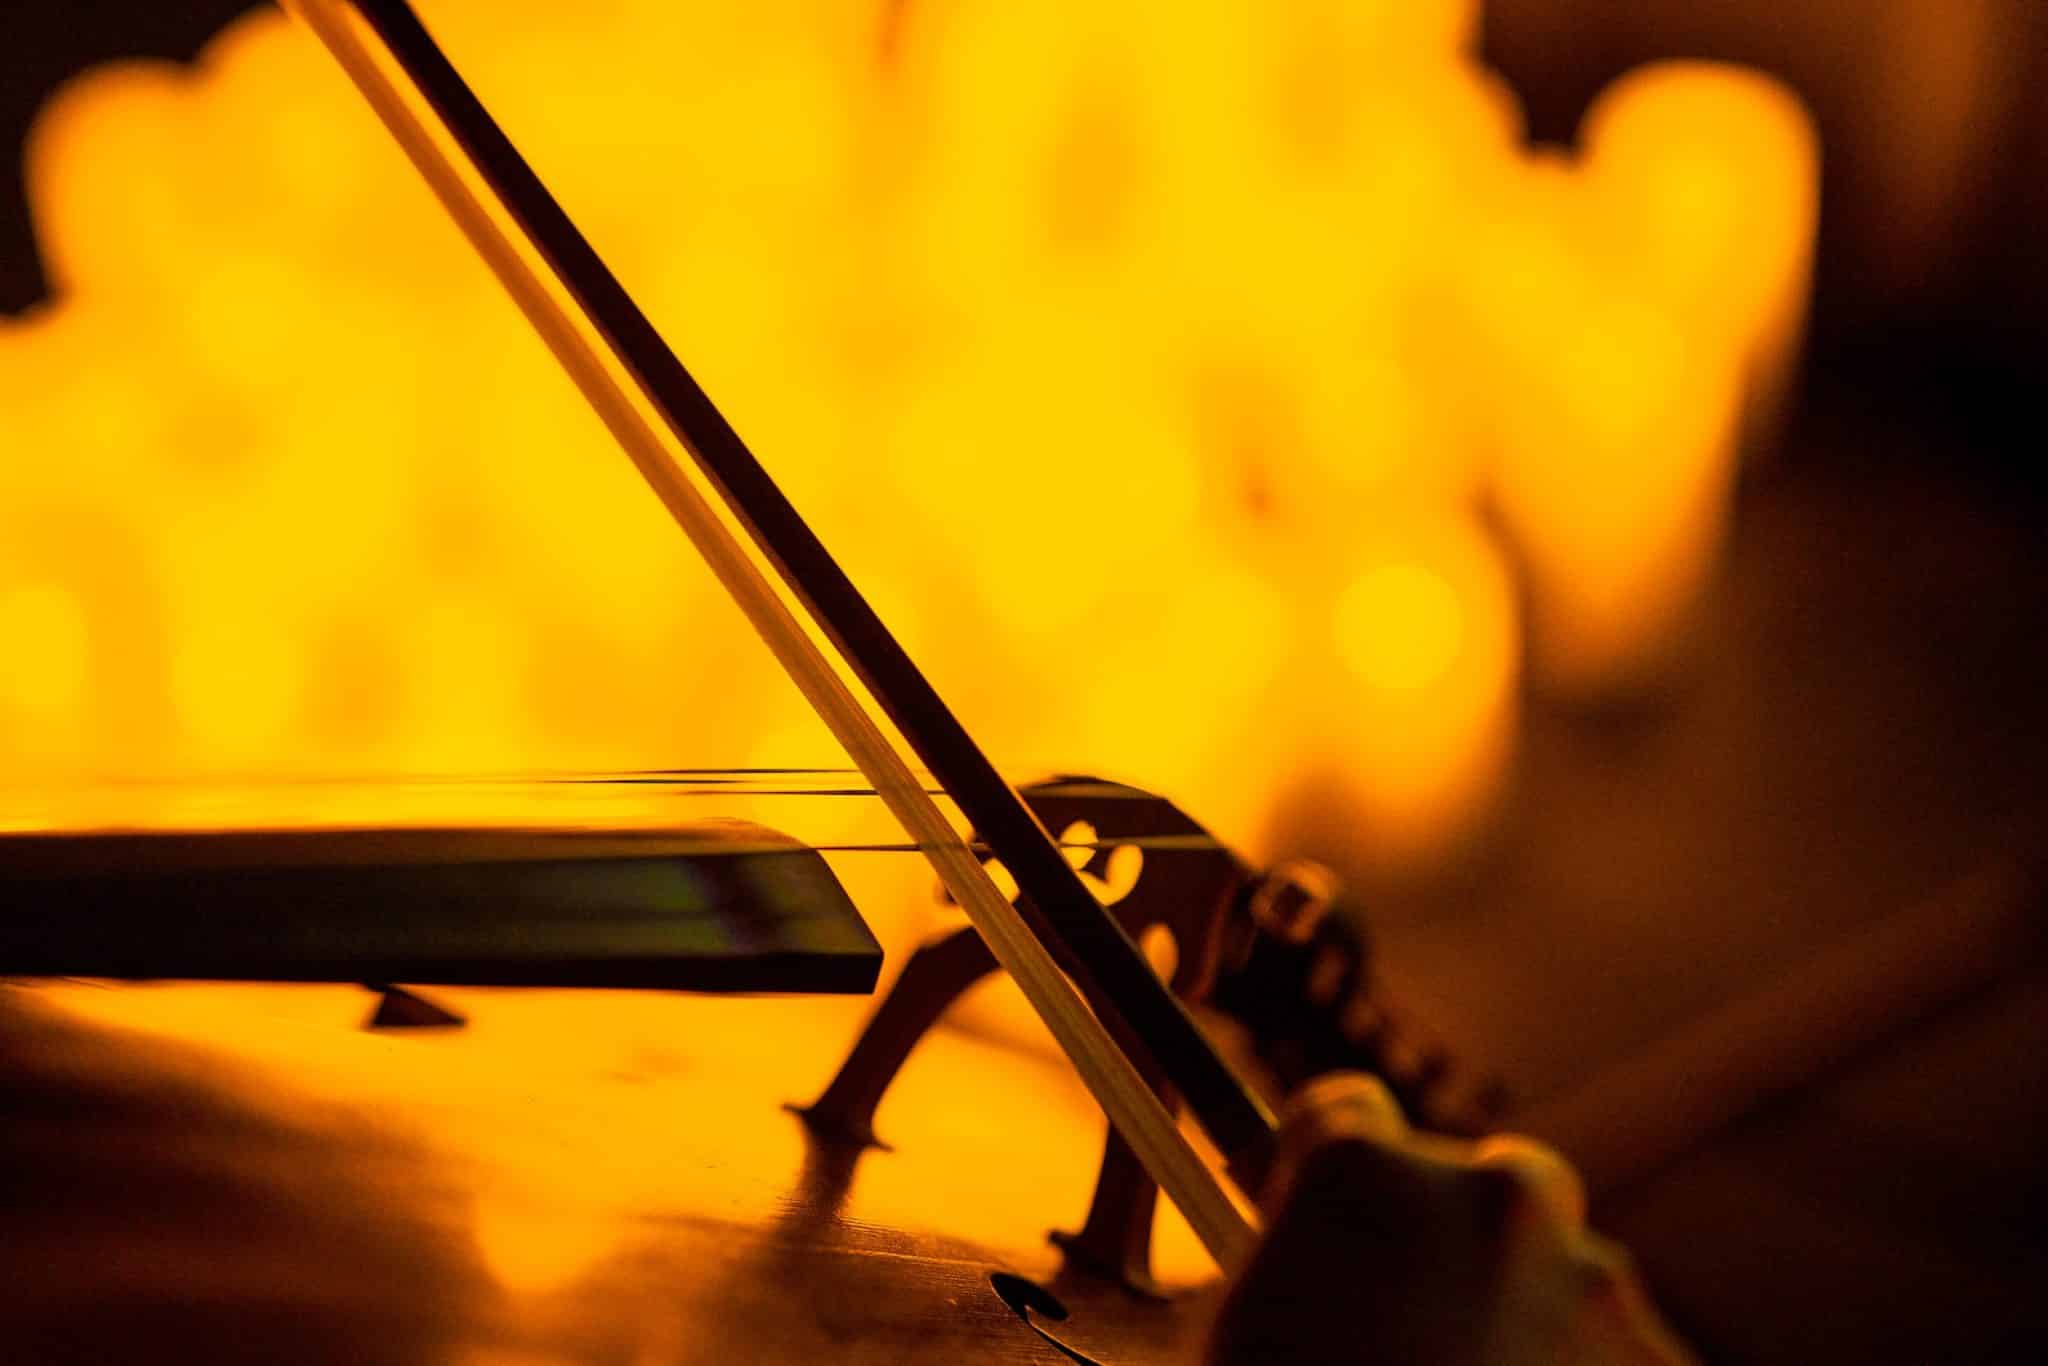 A close-up shot of a bow being used to play a string instrument with the blurry glow of candlelight in the background.